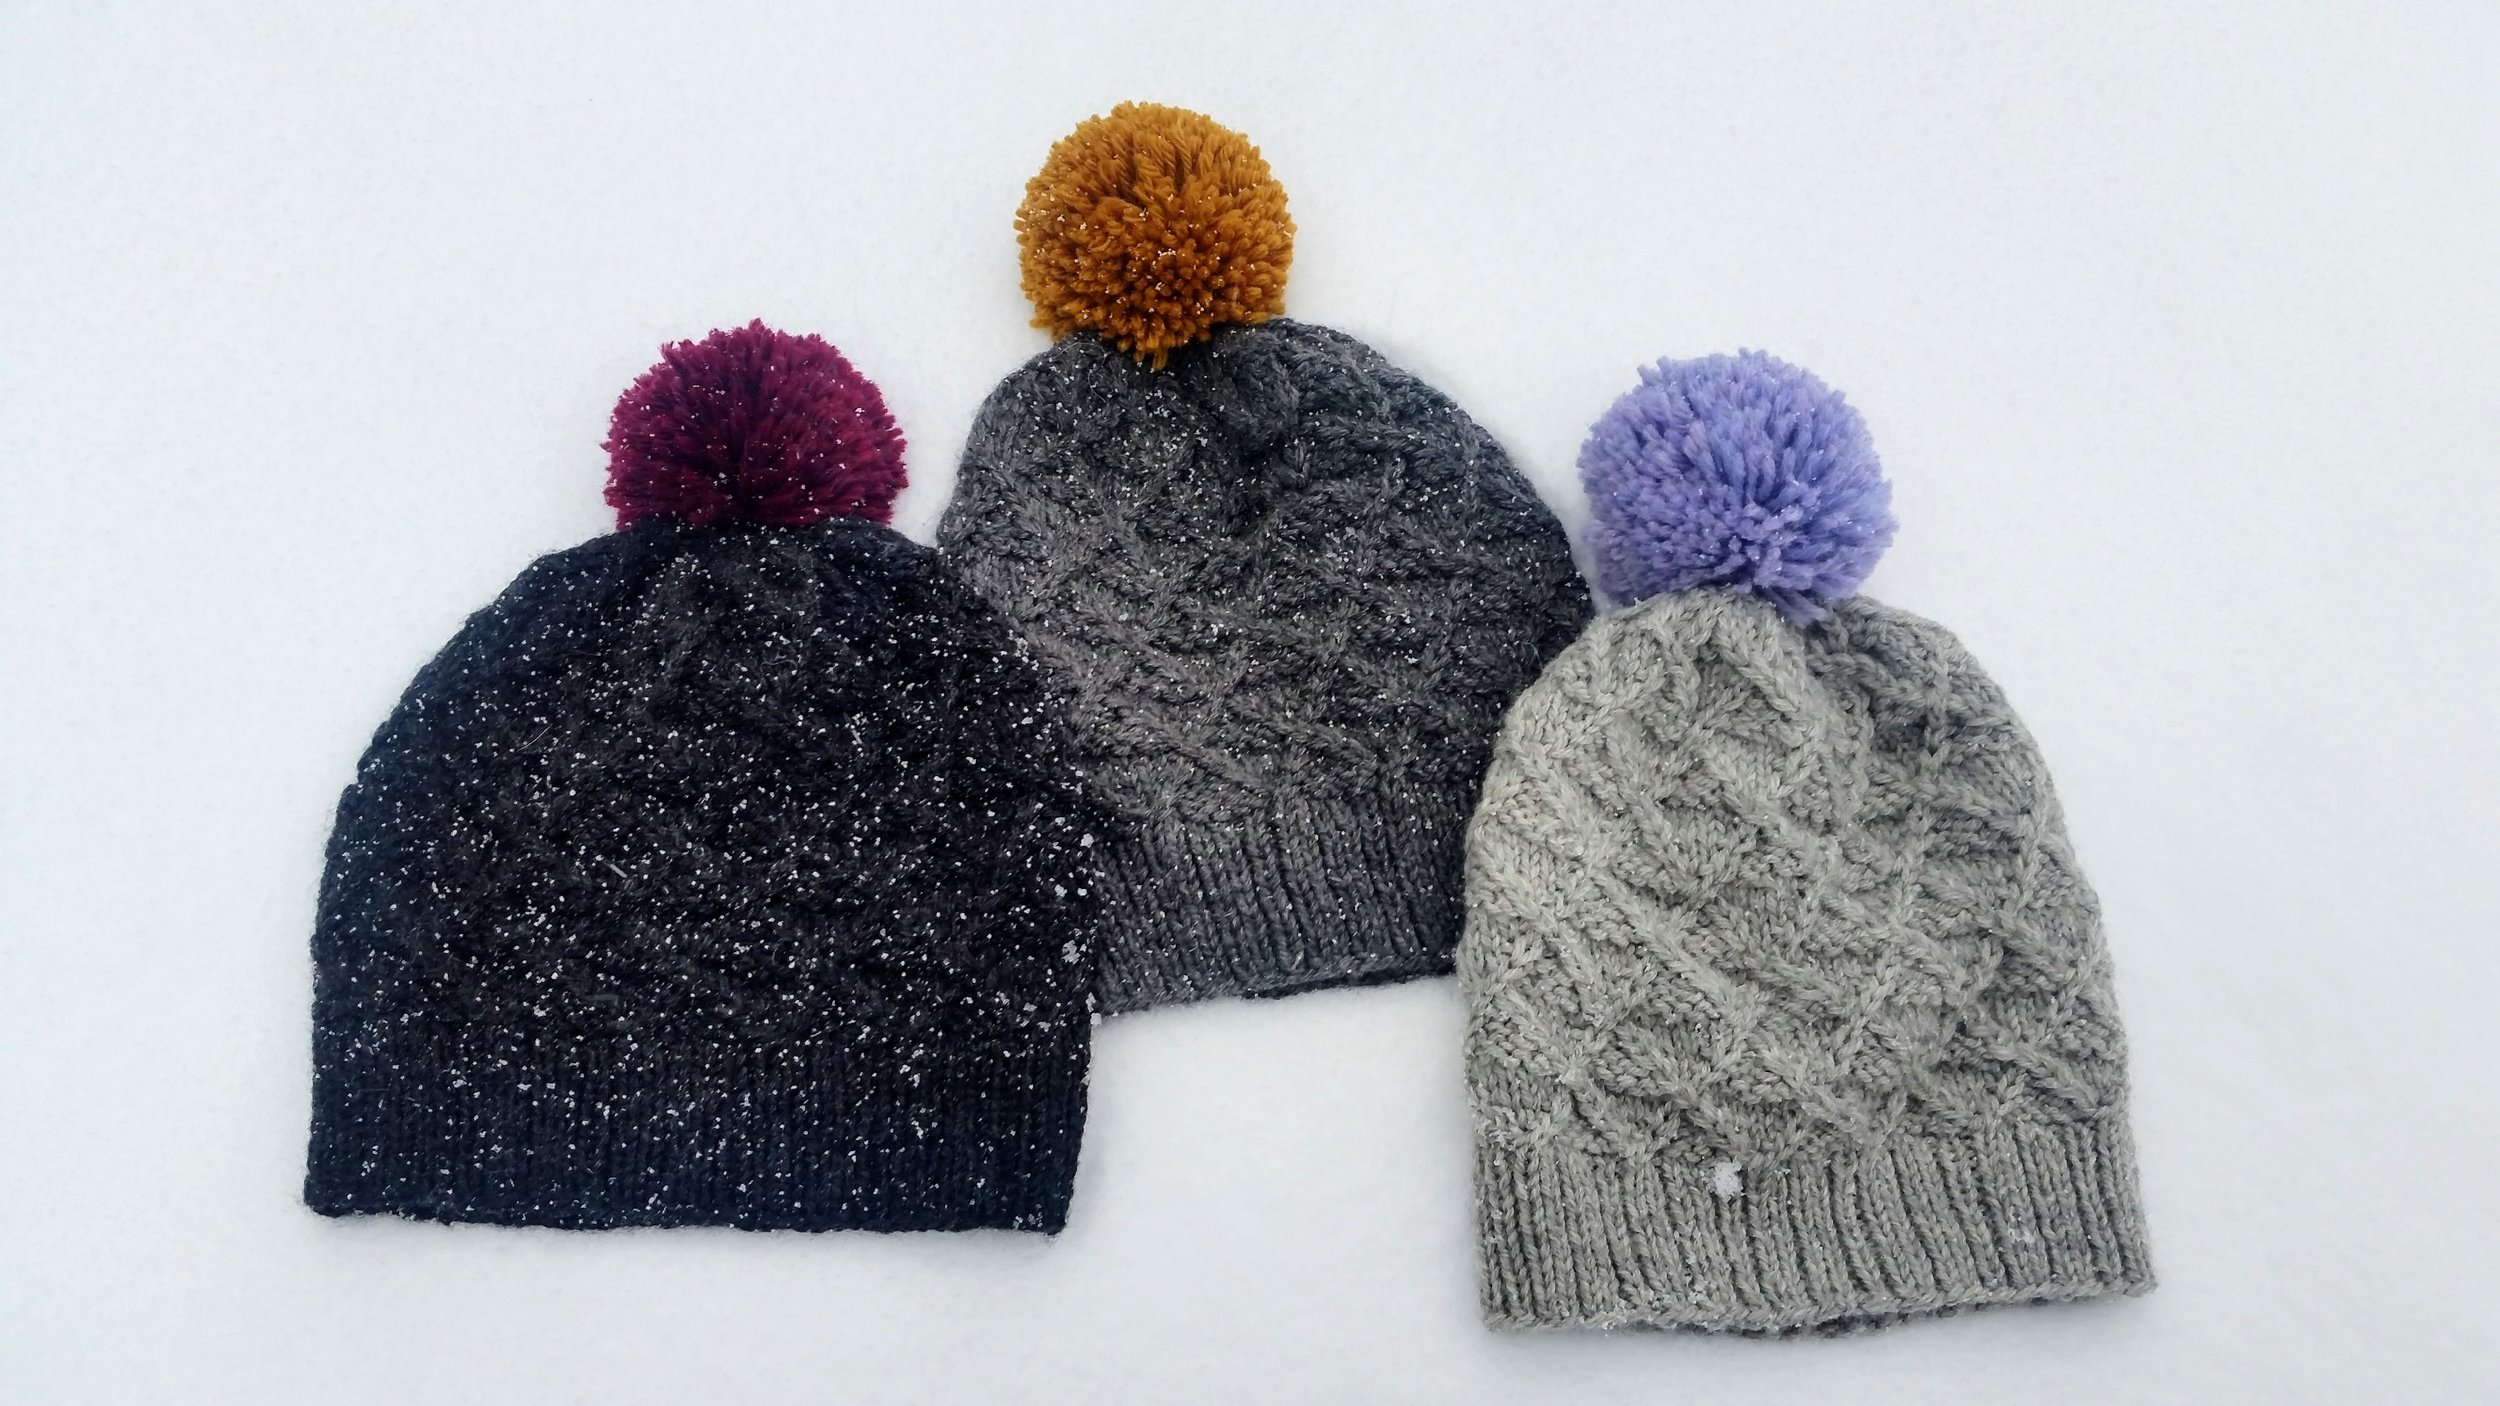 Three grey hats with an argyle knit texture and colourful pom-poms lie in the snow.